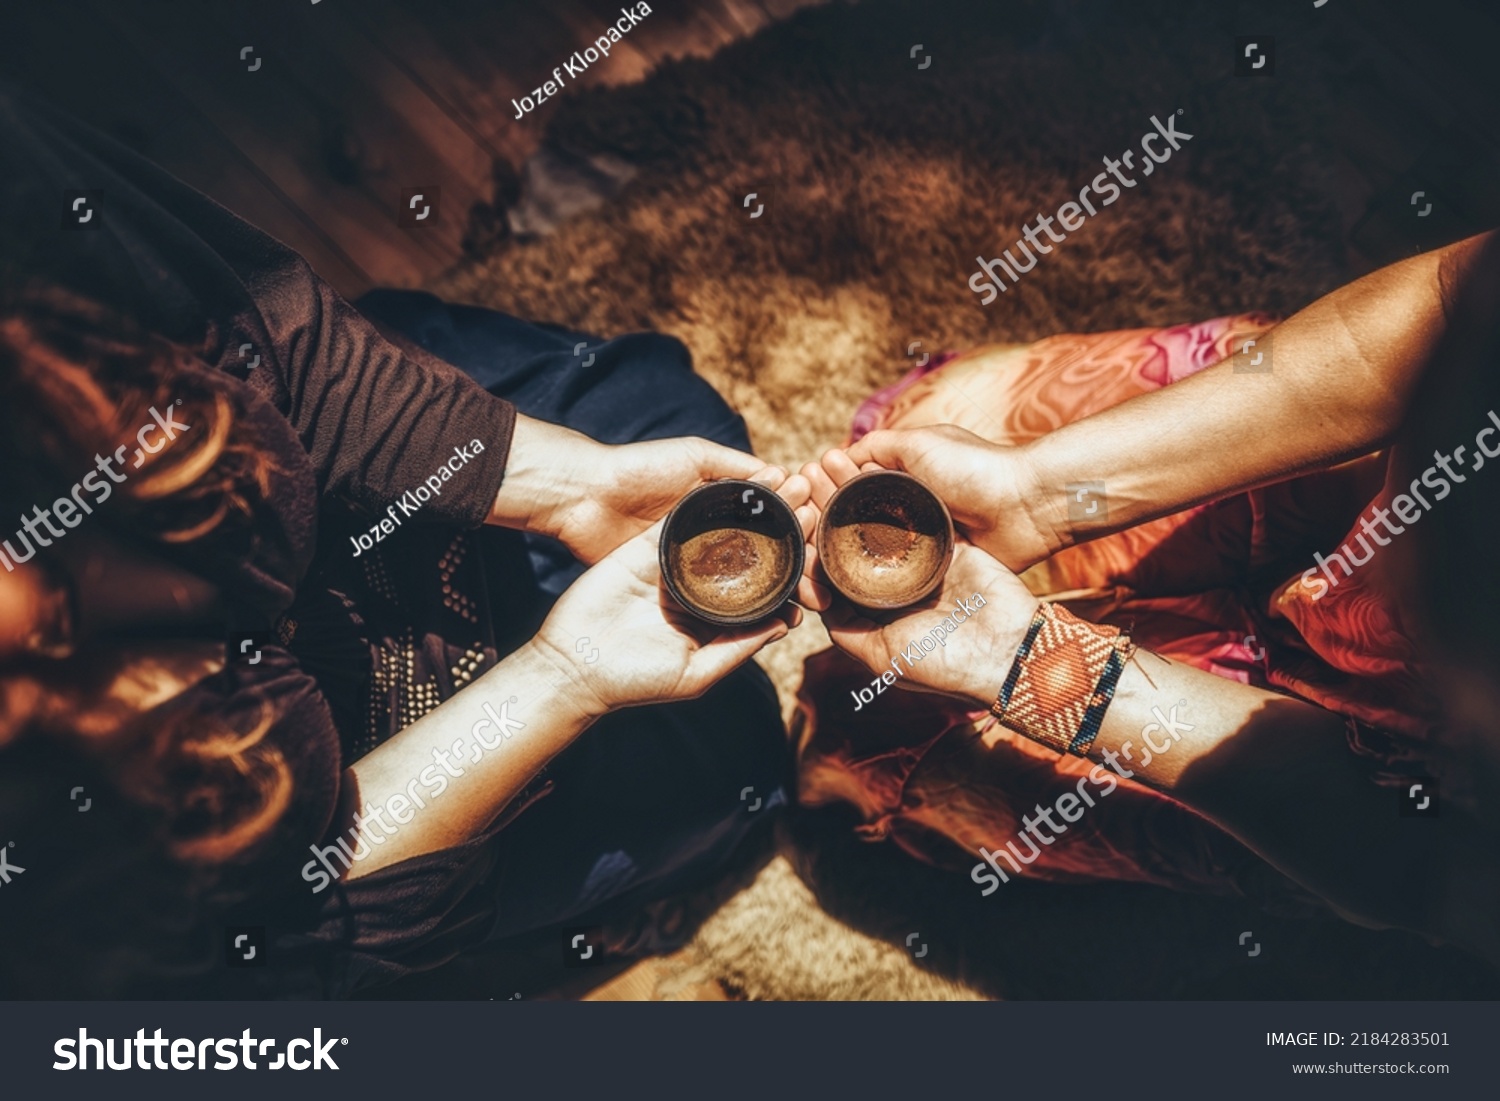 Cacao ceremony, heart opening medicine. Ceremony space #2184283501